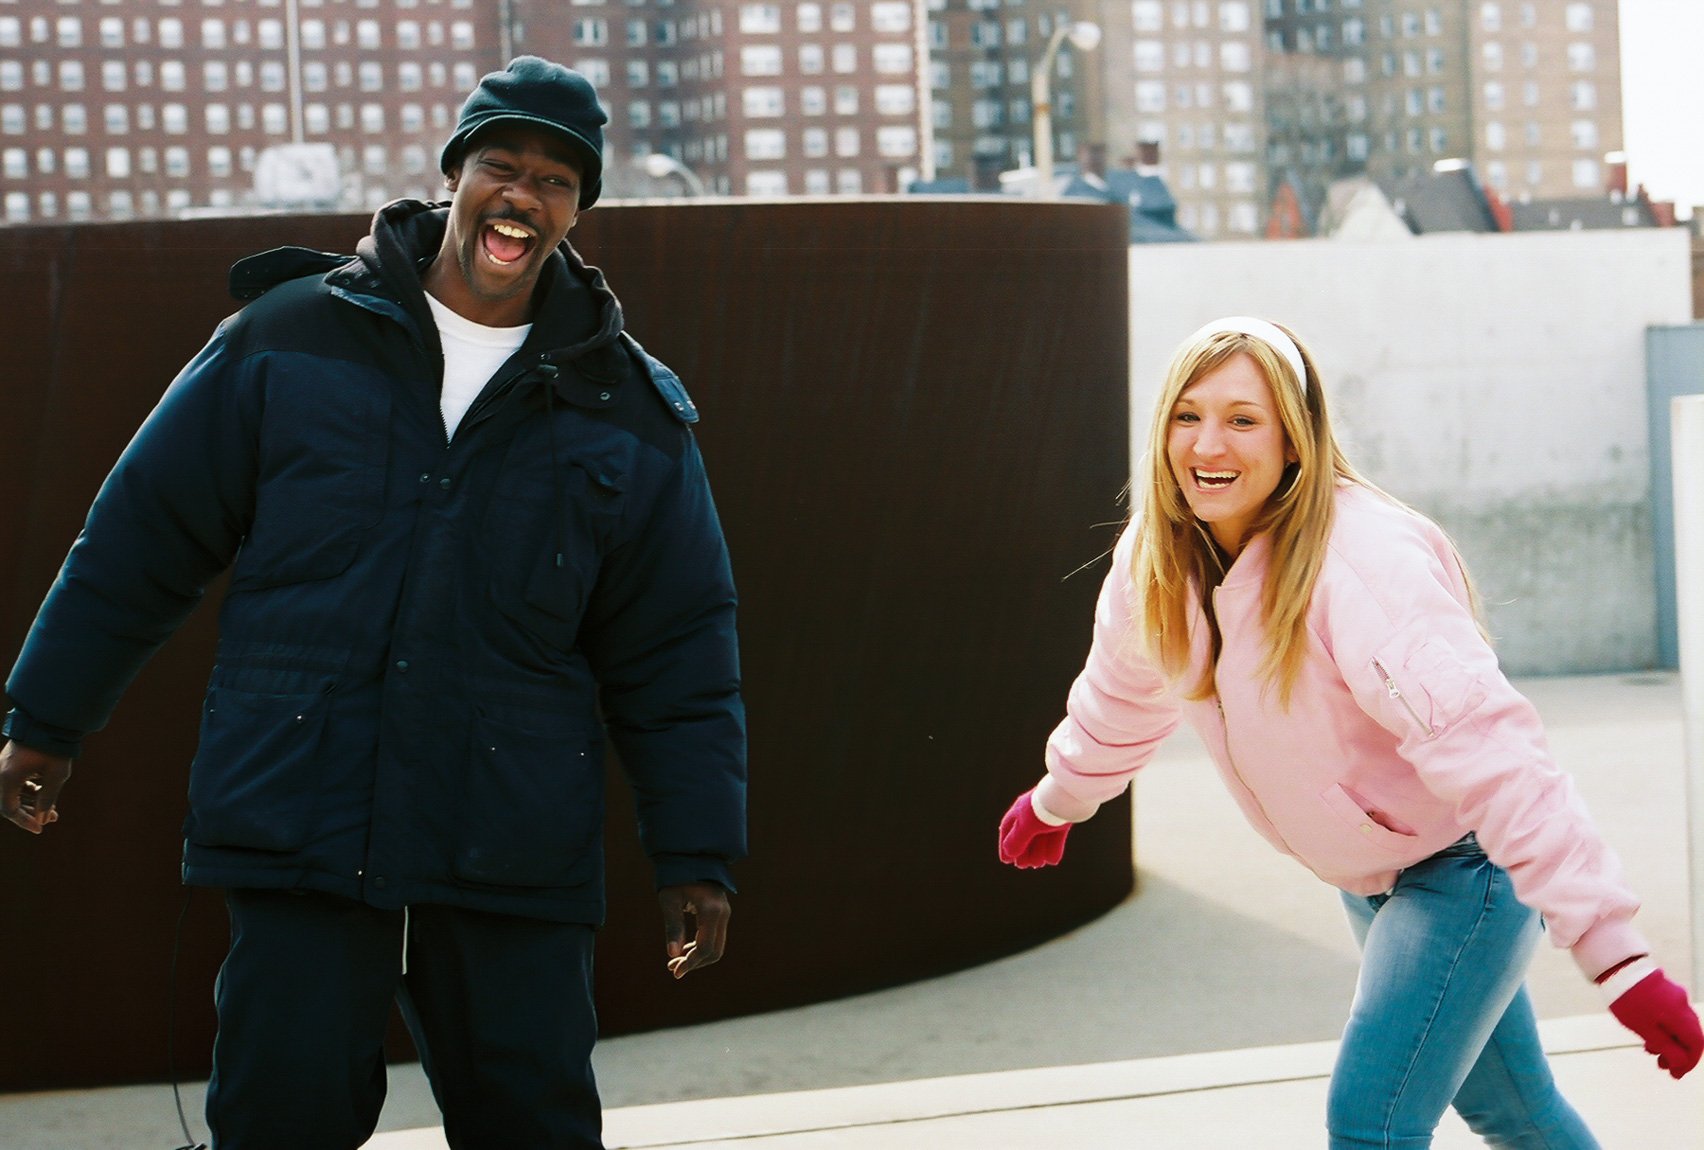 Two participants wearing winter clothes laugh together in the Courtyard in front of "Joe" by Richard Serra.